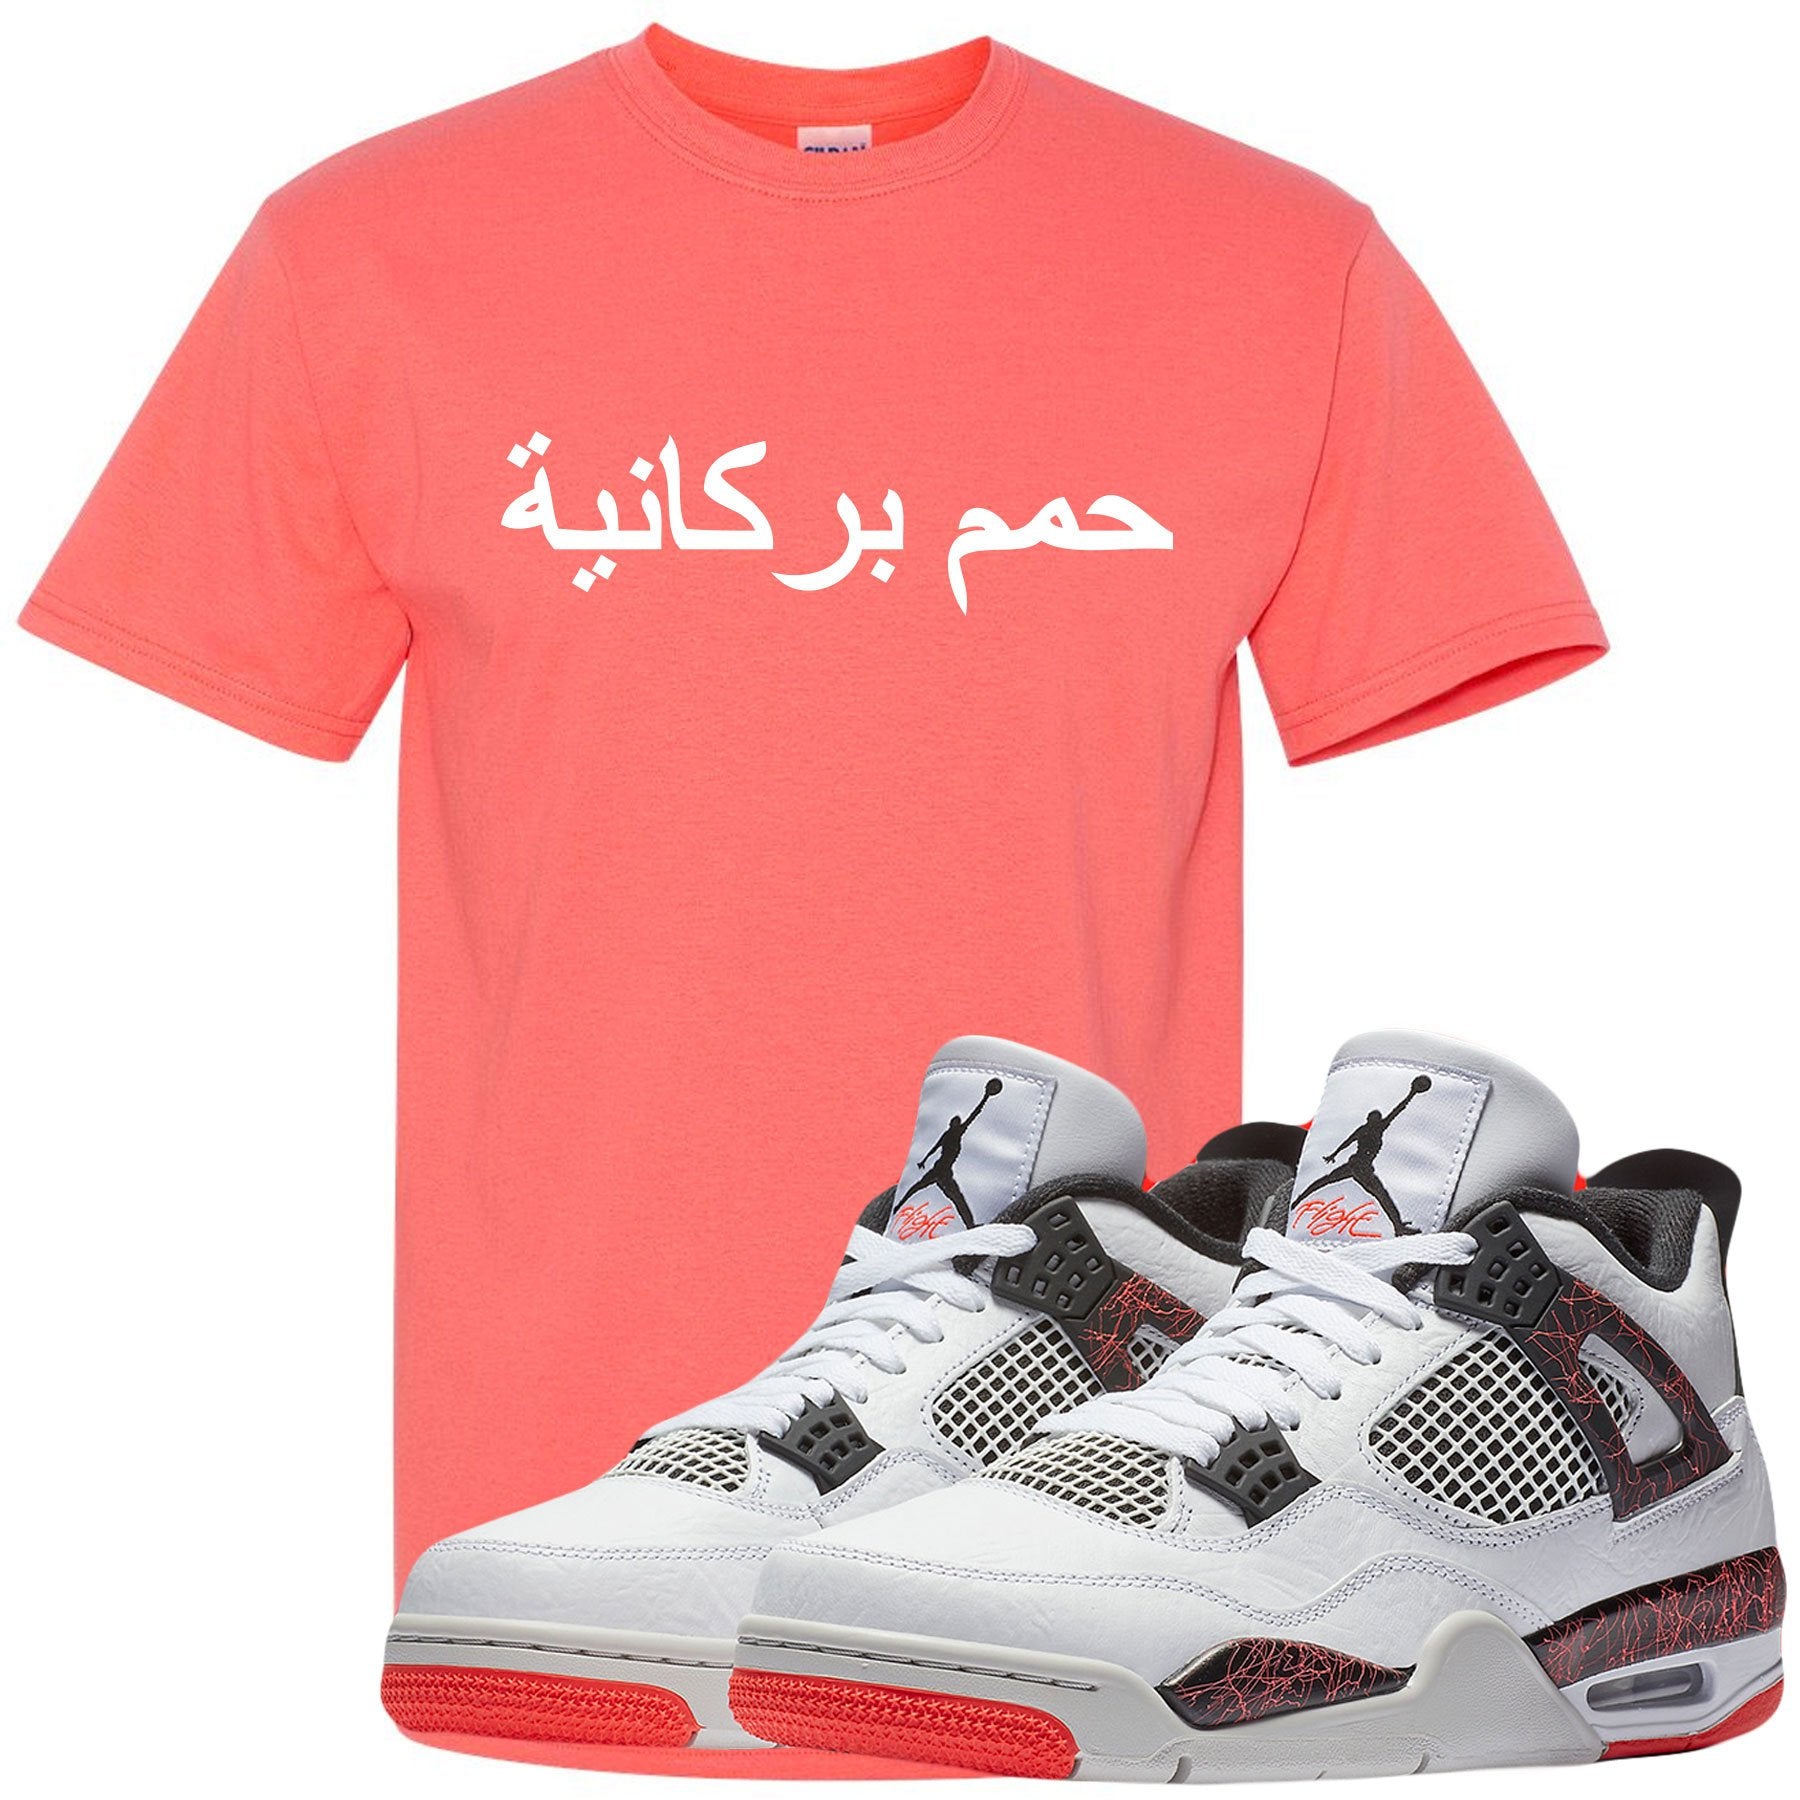 Match your pair of Jordan 4 Pale Citron "Hot Lava 4s" sneakers with this sneaker matching t-shirt